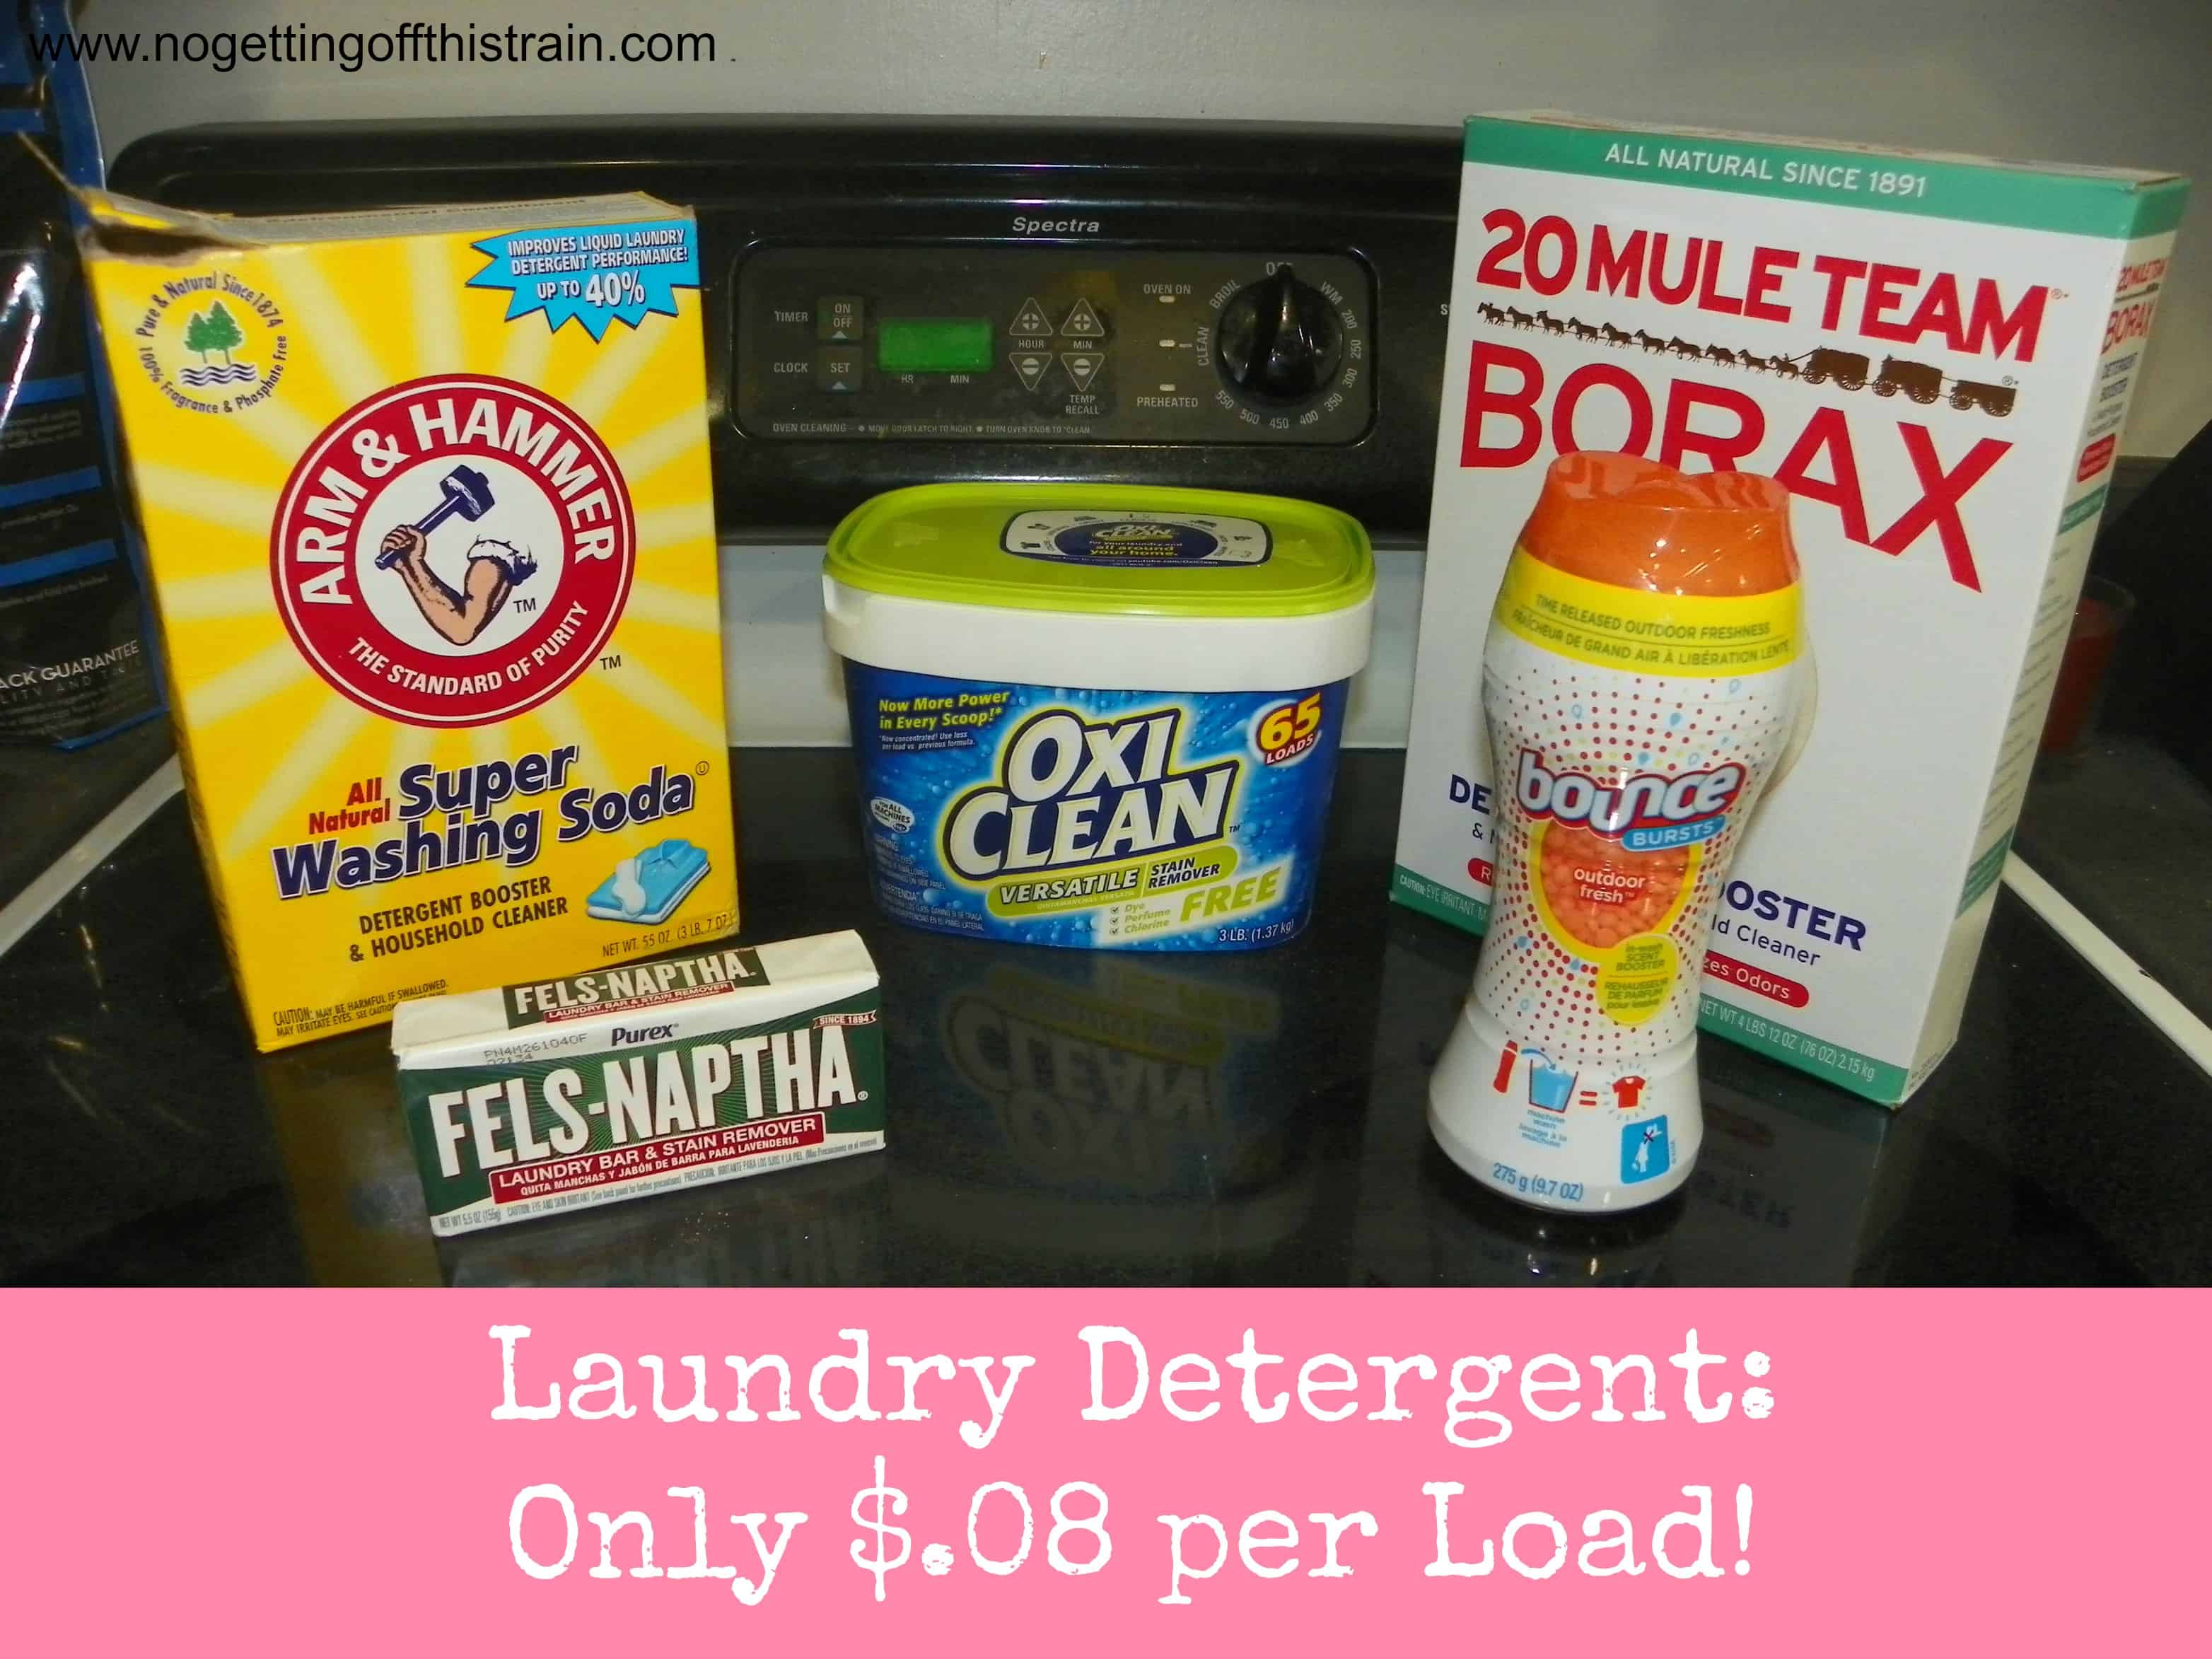 Make Your Own Laundry Detergent for Only $.08 per Load!